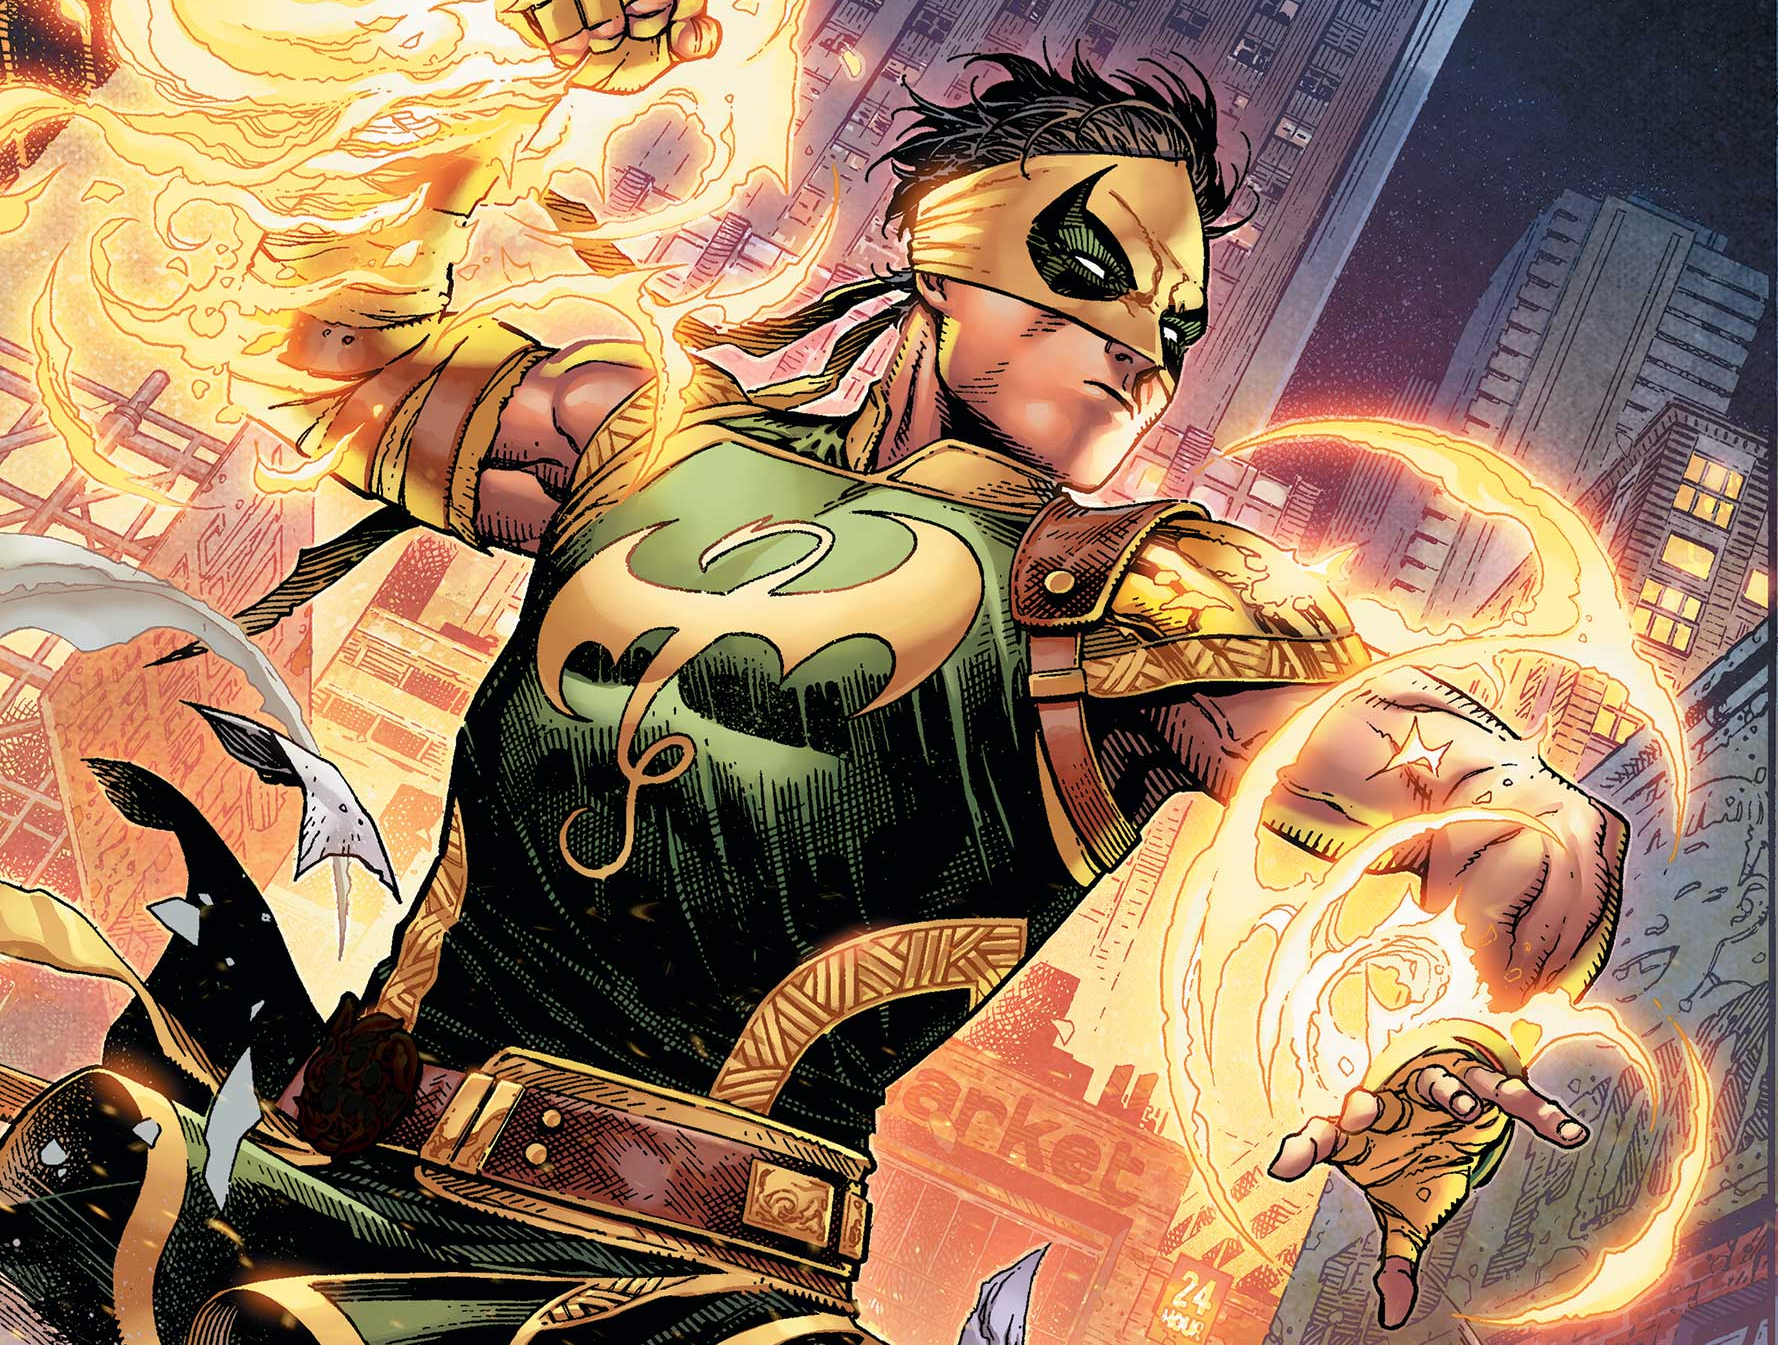 Marvel Just Made a Major Change to Iron Fist